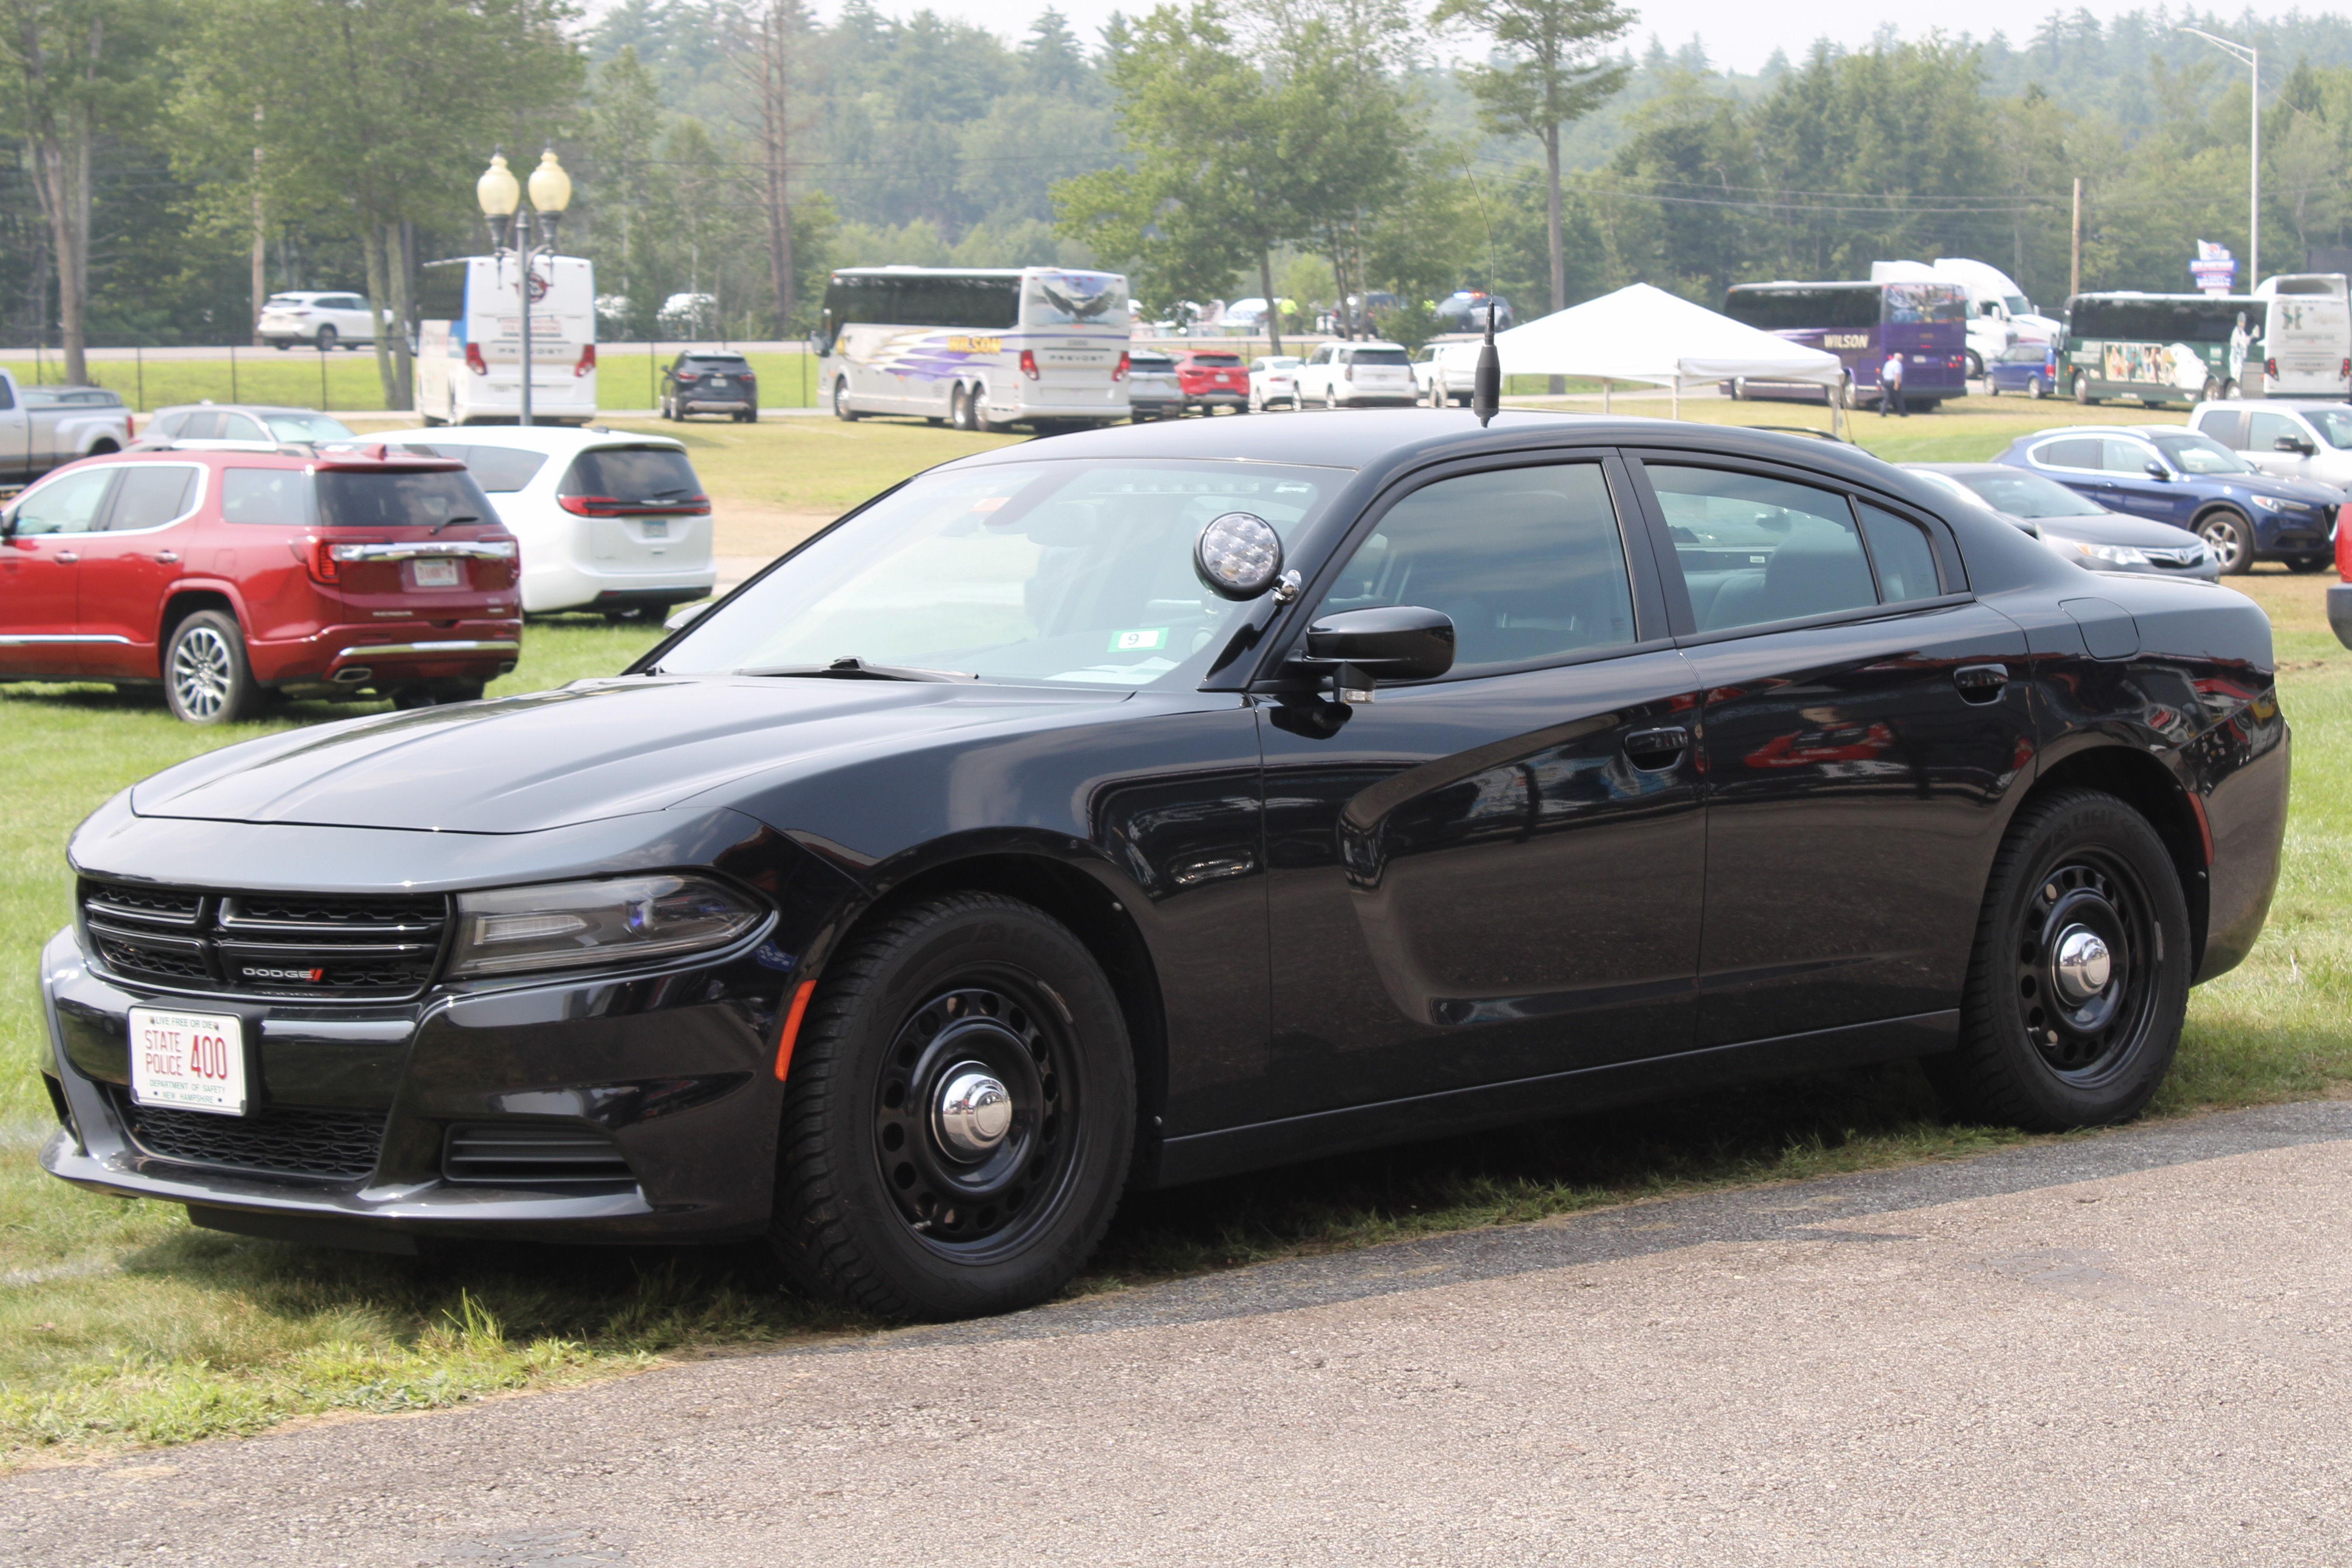 A photo  of New Hampshire State Police
            Cruiser 400, a 2015-2022 Dodge Charger             taken by @riemergencyvehicles